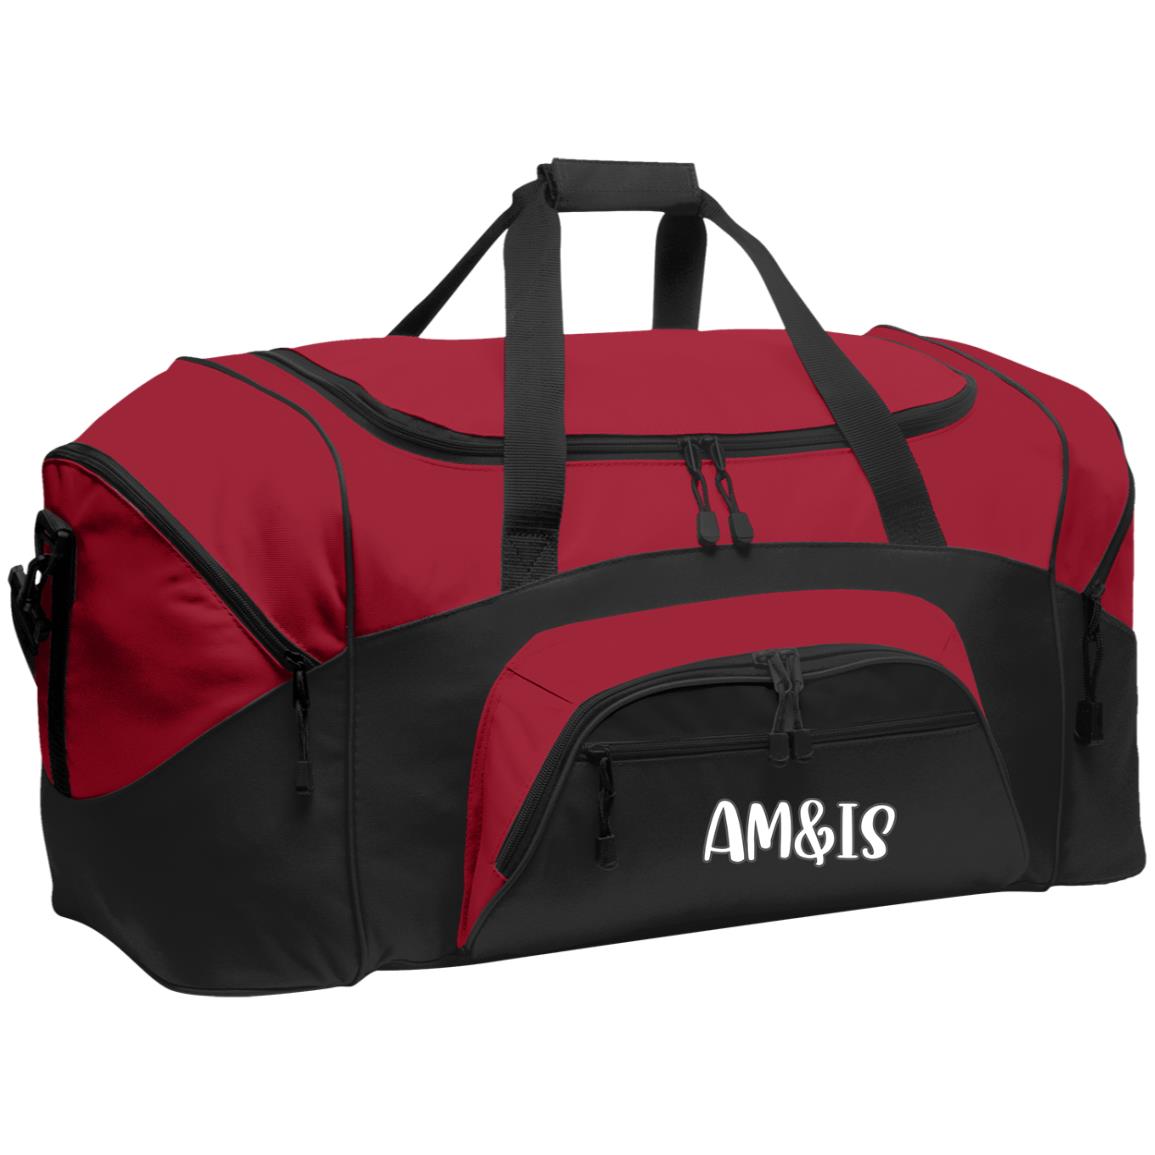 BLACK/TRUE RED ONE SIZE - AM&IS Activewear Colorblock Sport Duffel - duffel bag at TFC&H Co.